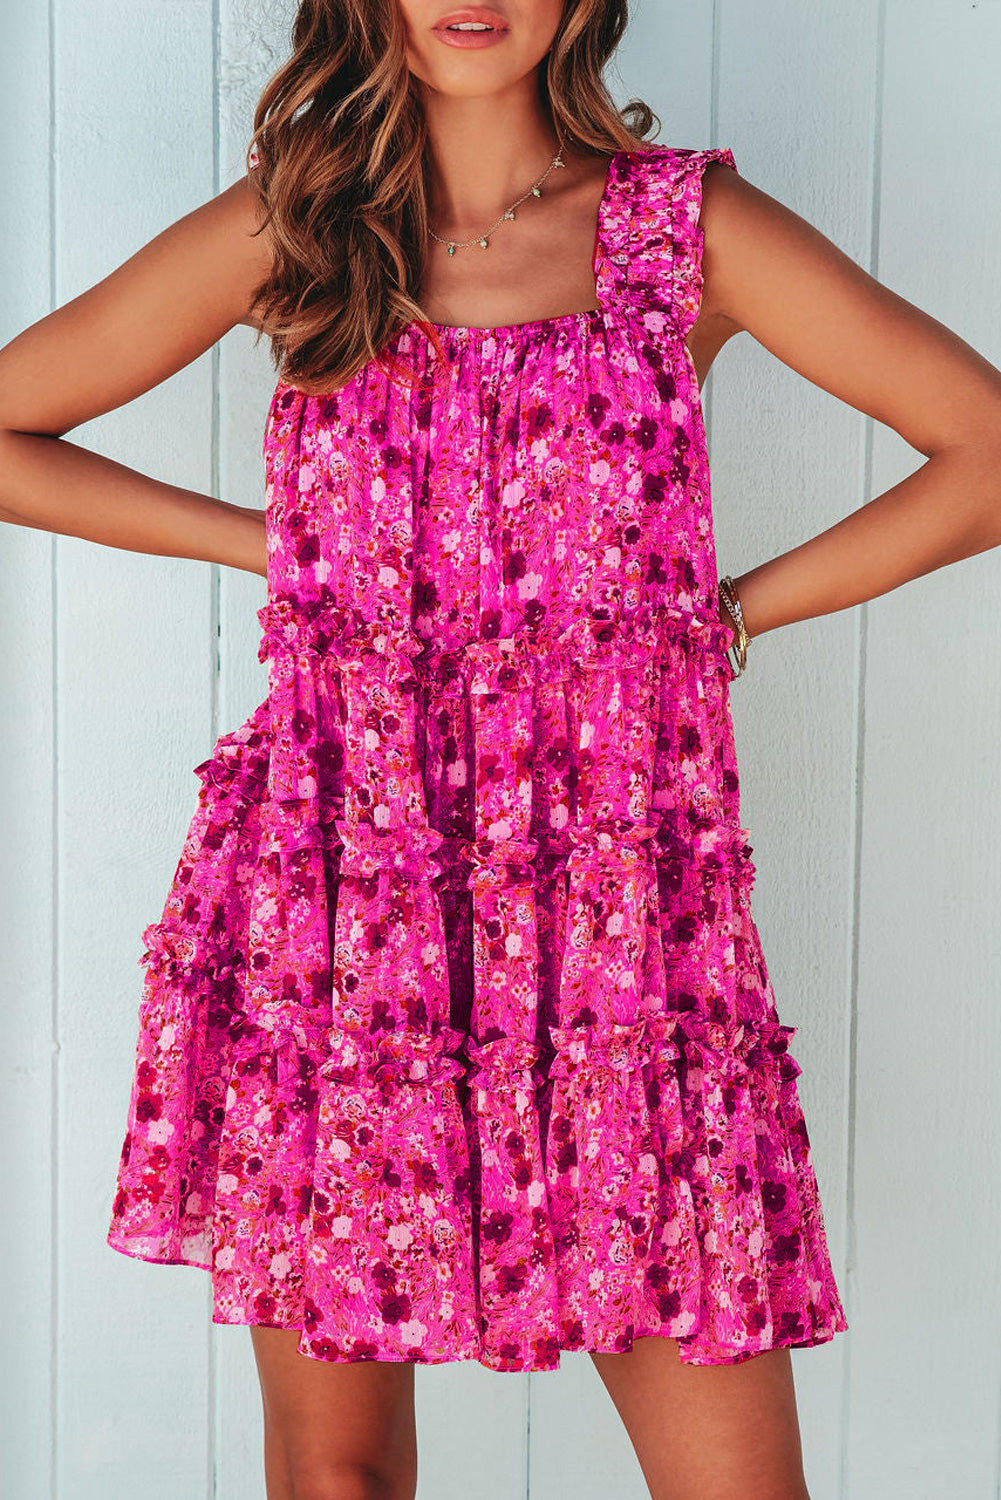 Rose Tiered Ruffled Square Neck Sleeveless Floral Mini Dress